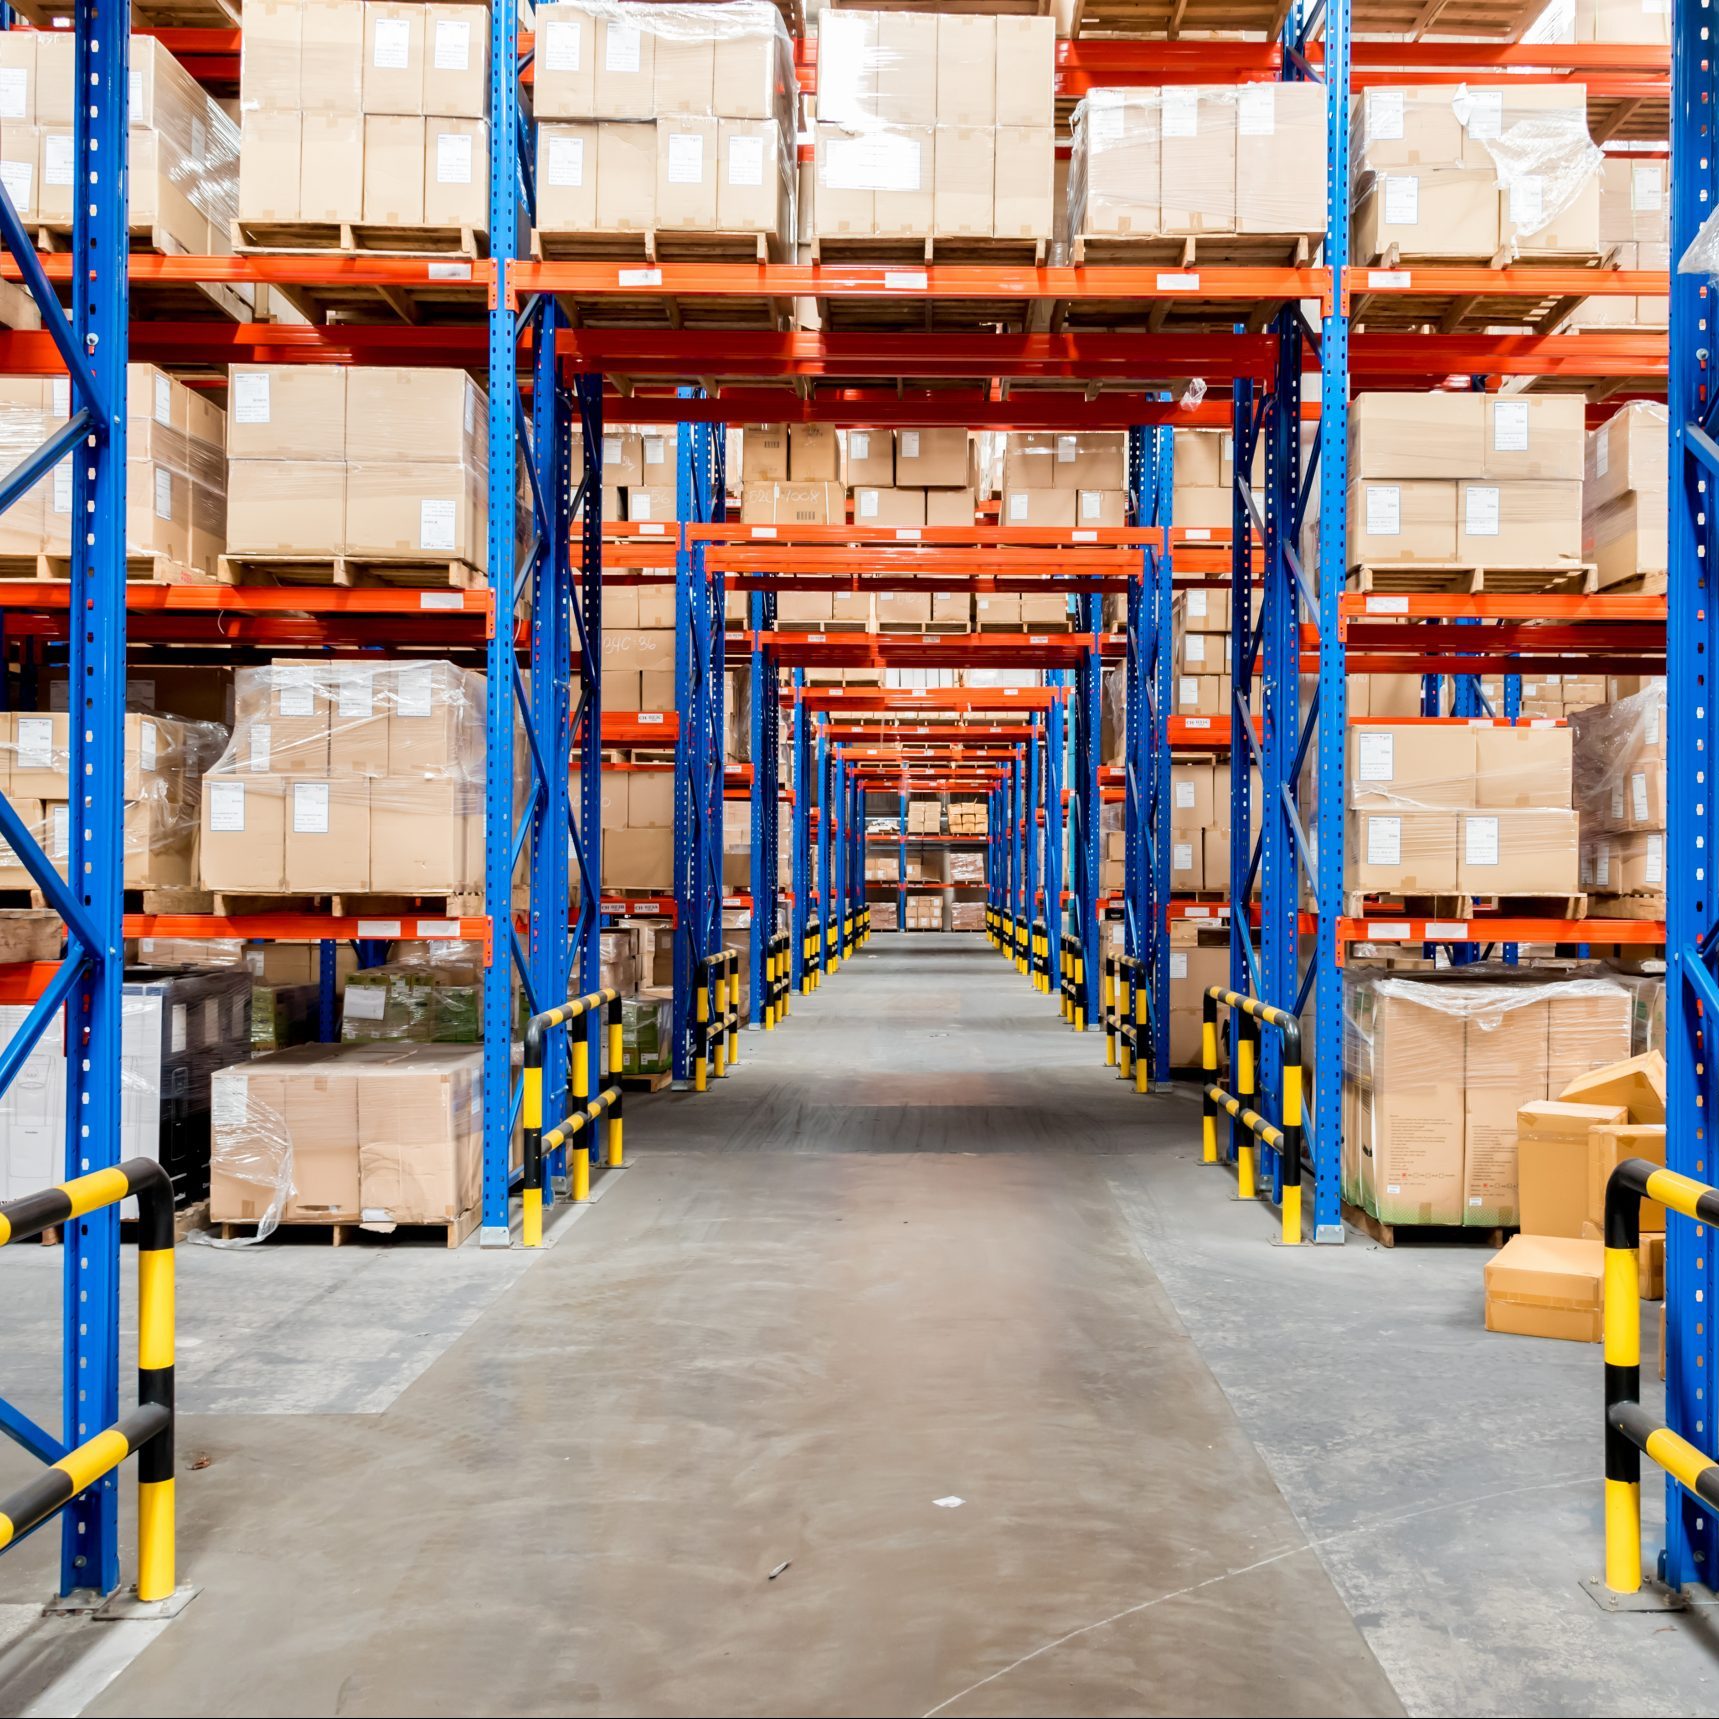 Warehouse showing rows of shelving and packages